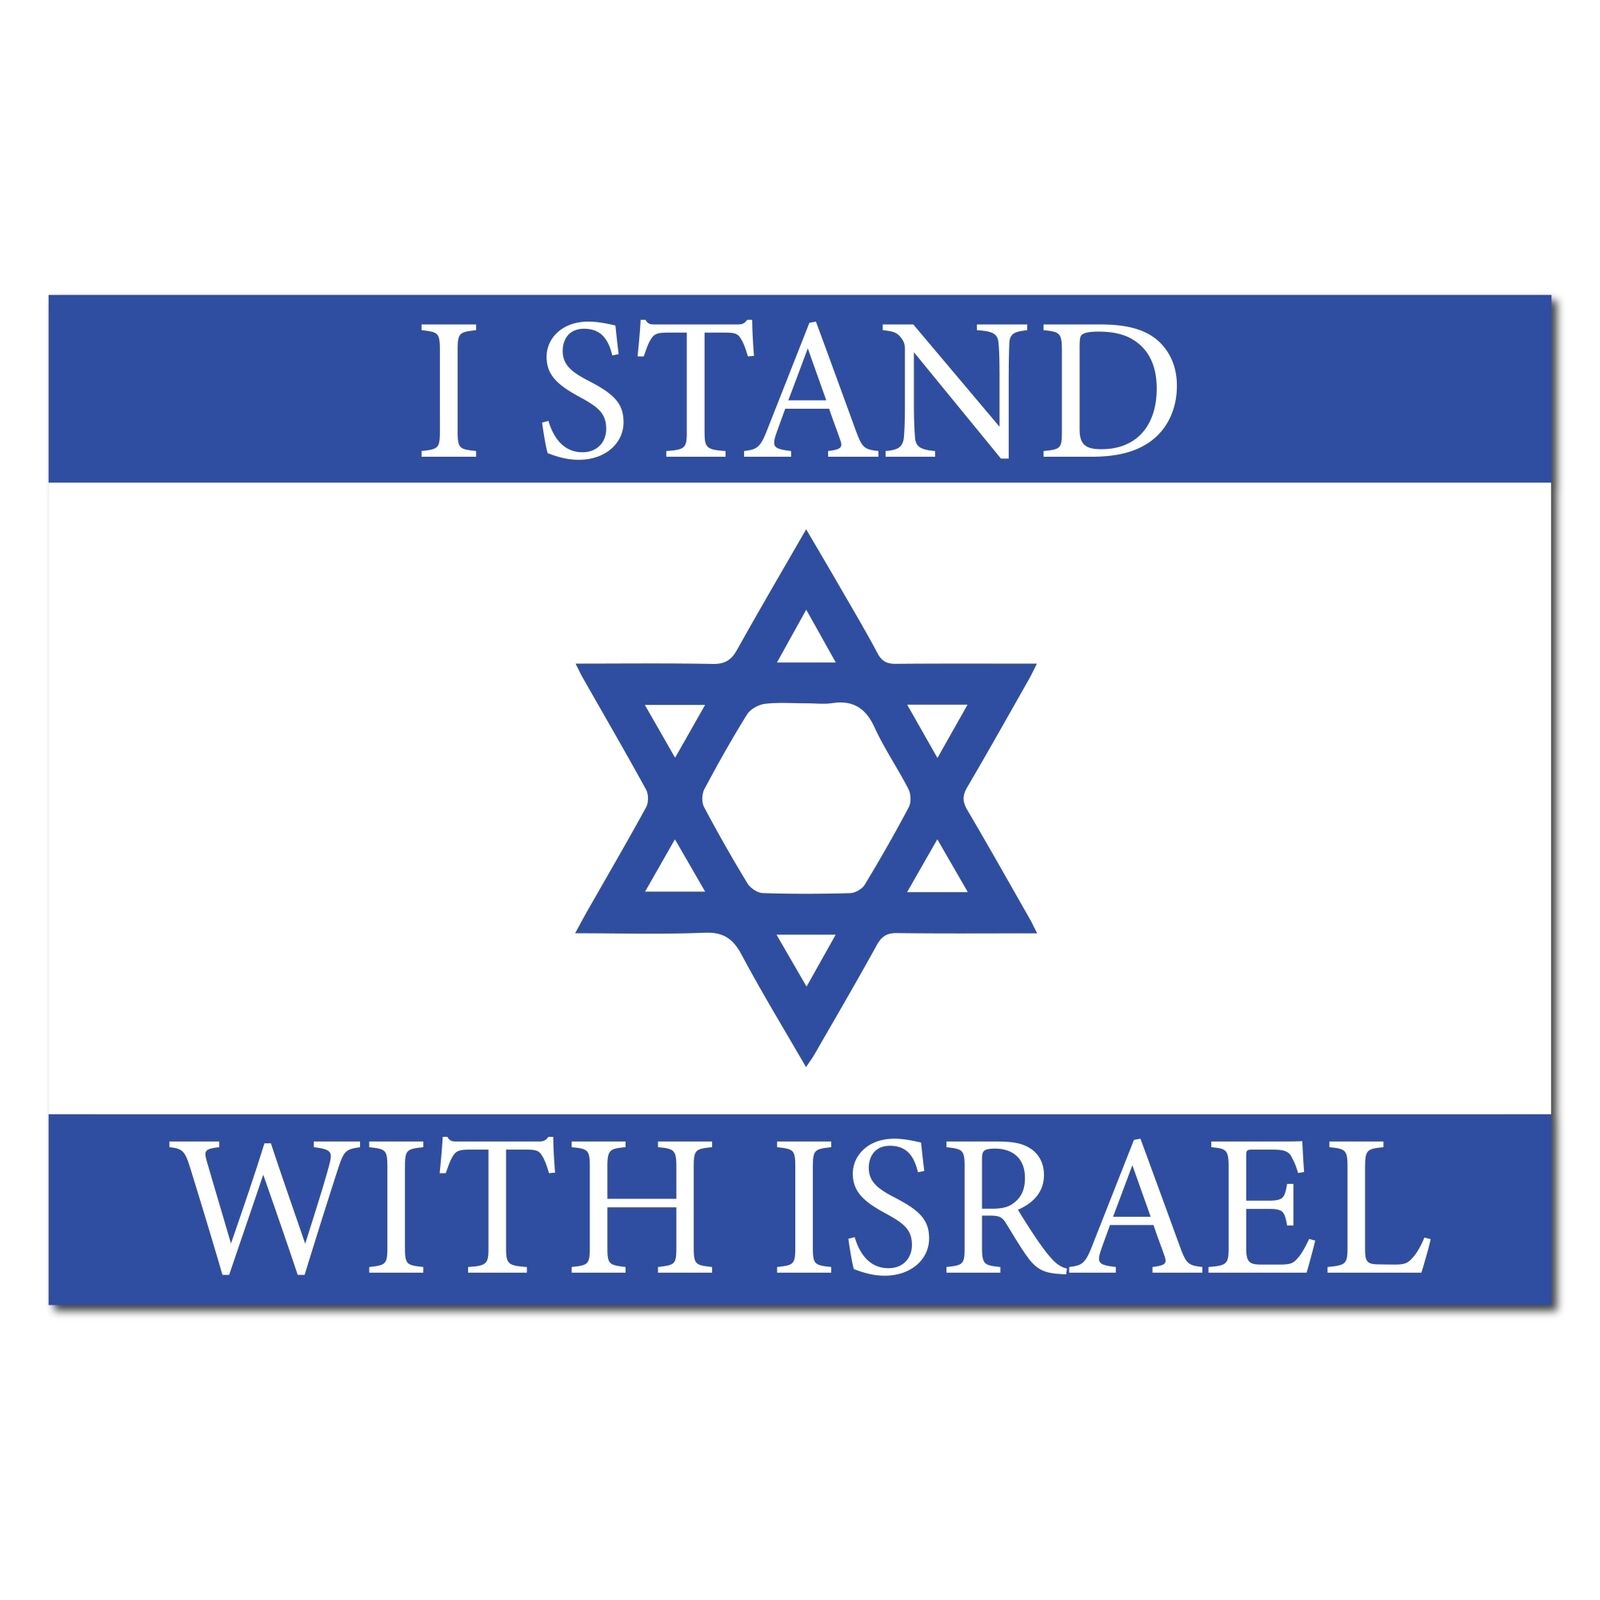 I Stand With Israel Israeli Flag Magnet Decal, 4x6 Inches, Blue and White